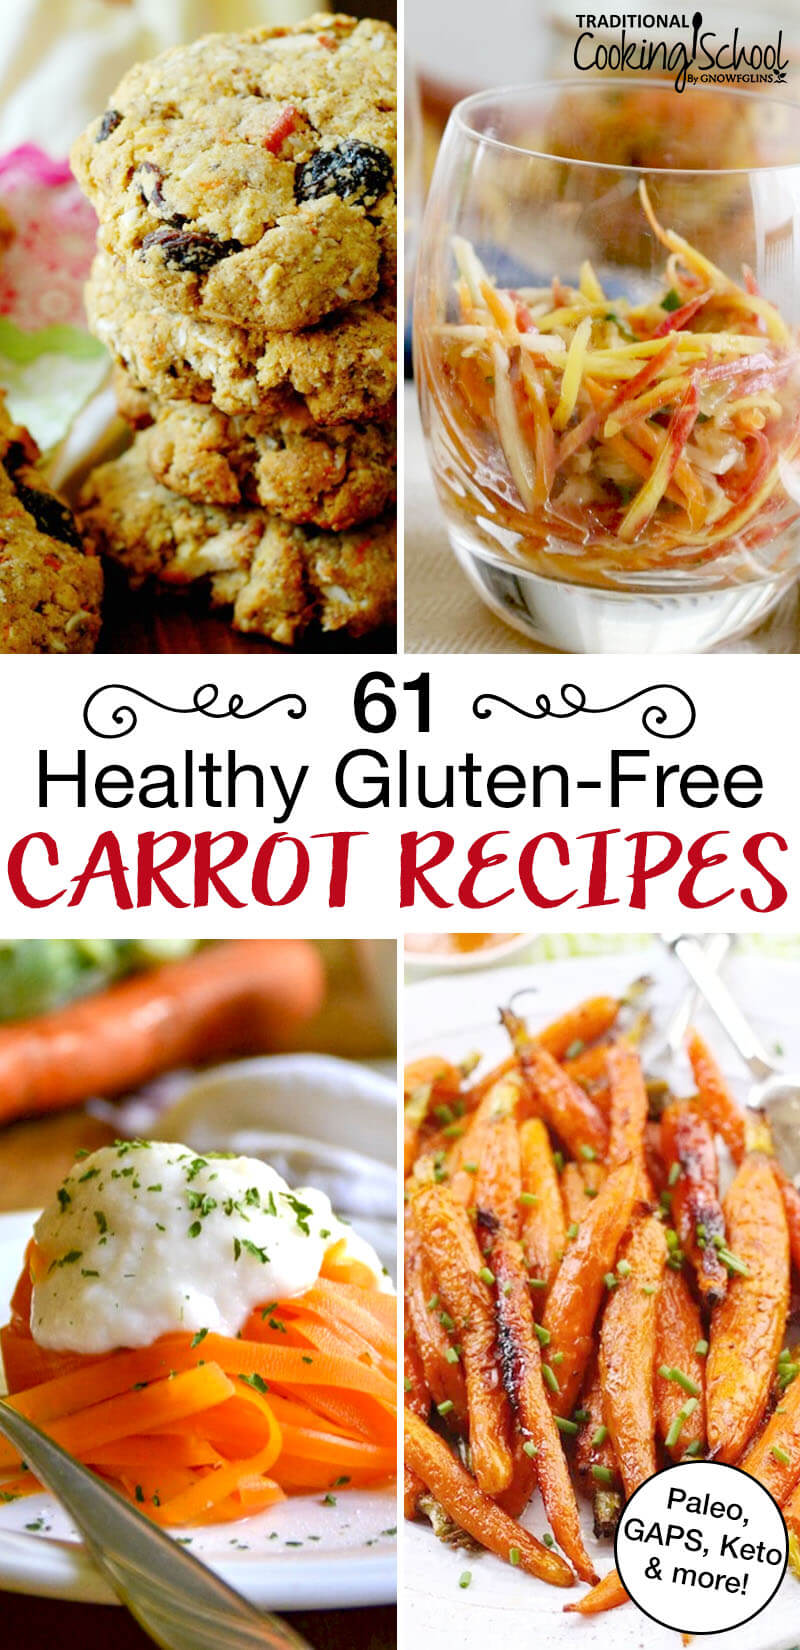 photo collage of carrot recipes, including roasted carrots, glazed carrots, and carrot cookies, with text overlay: "61 Healthy Gluten-Free Carrot Recipes (Paleo, GAPS, Keto, & more!)"